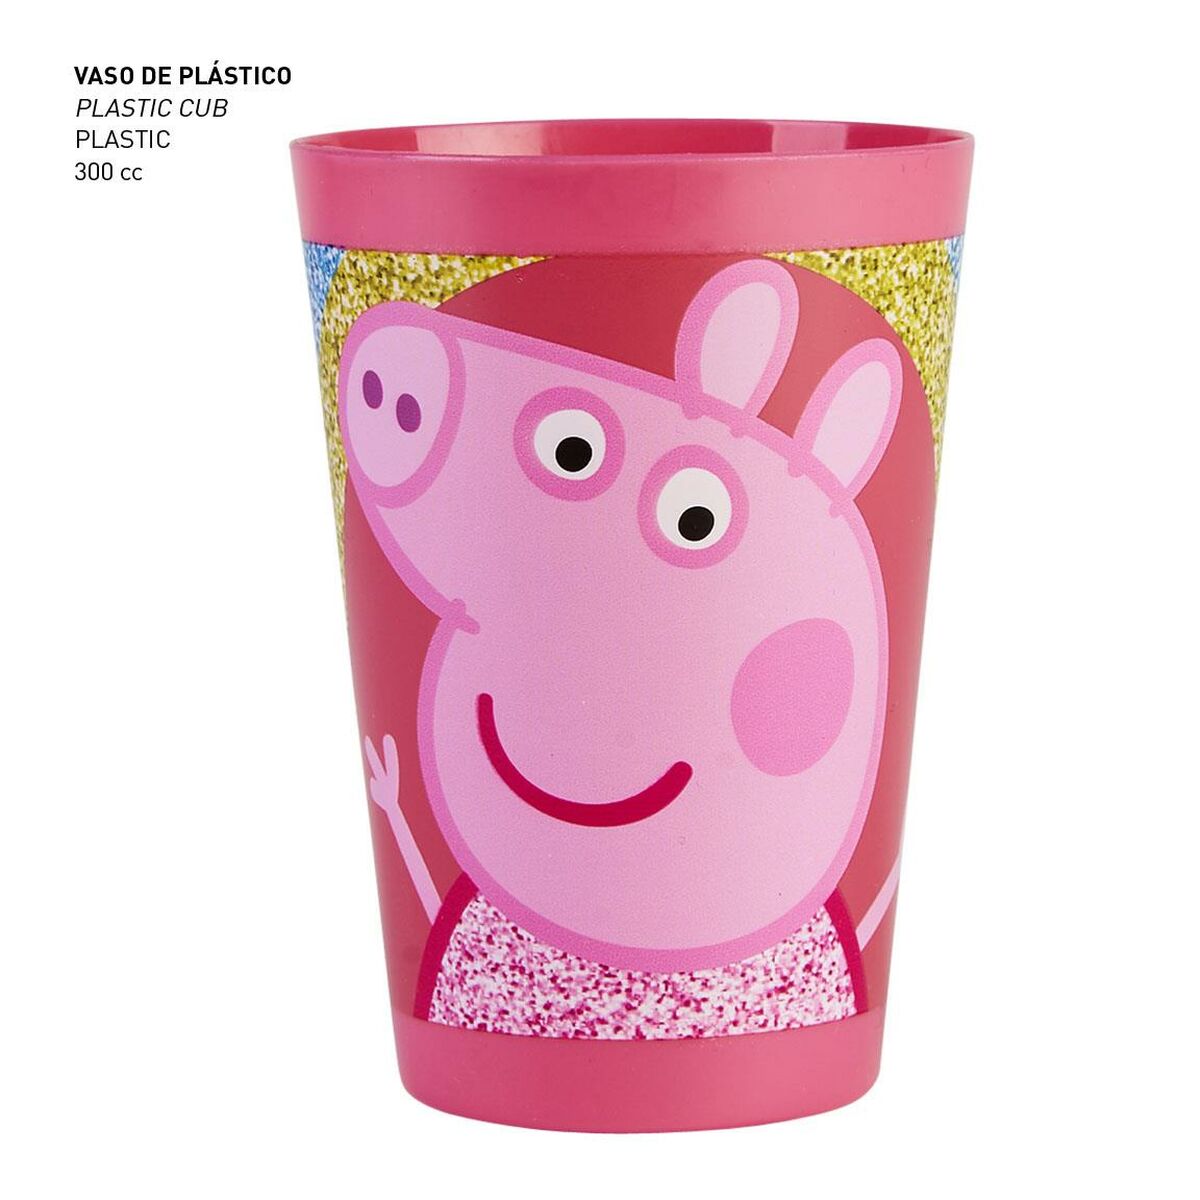 Toilet Bag with Accessories Peppa Pig 4 Pieces Fuchsia (23 x 16 x 7 cm)